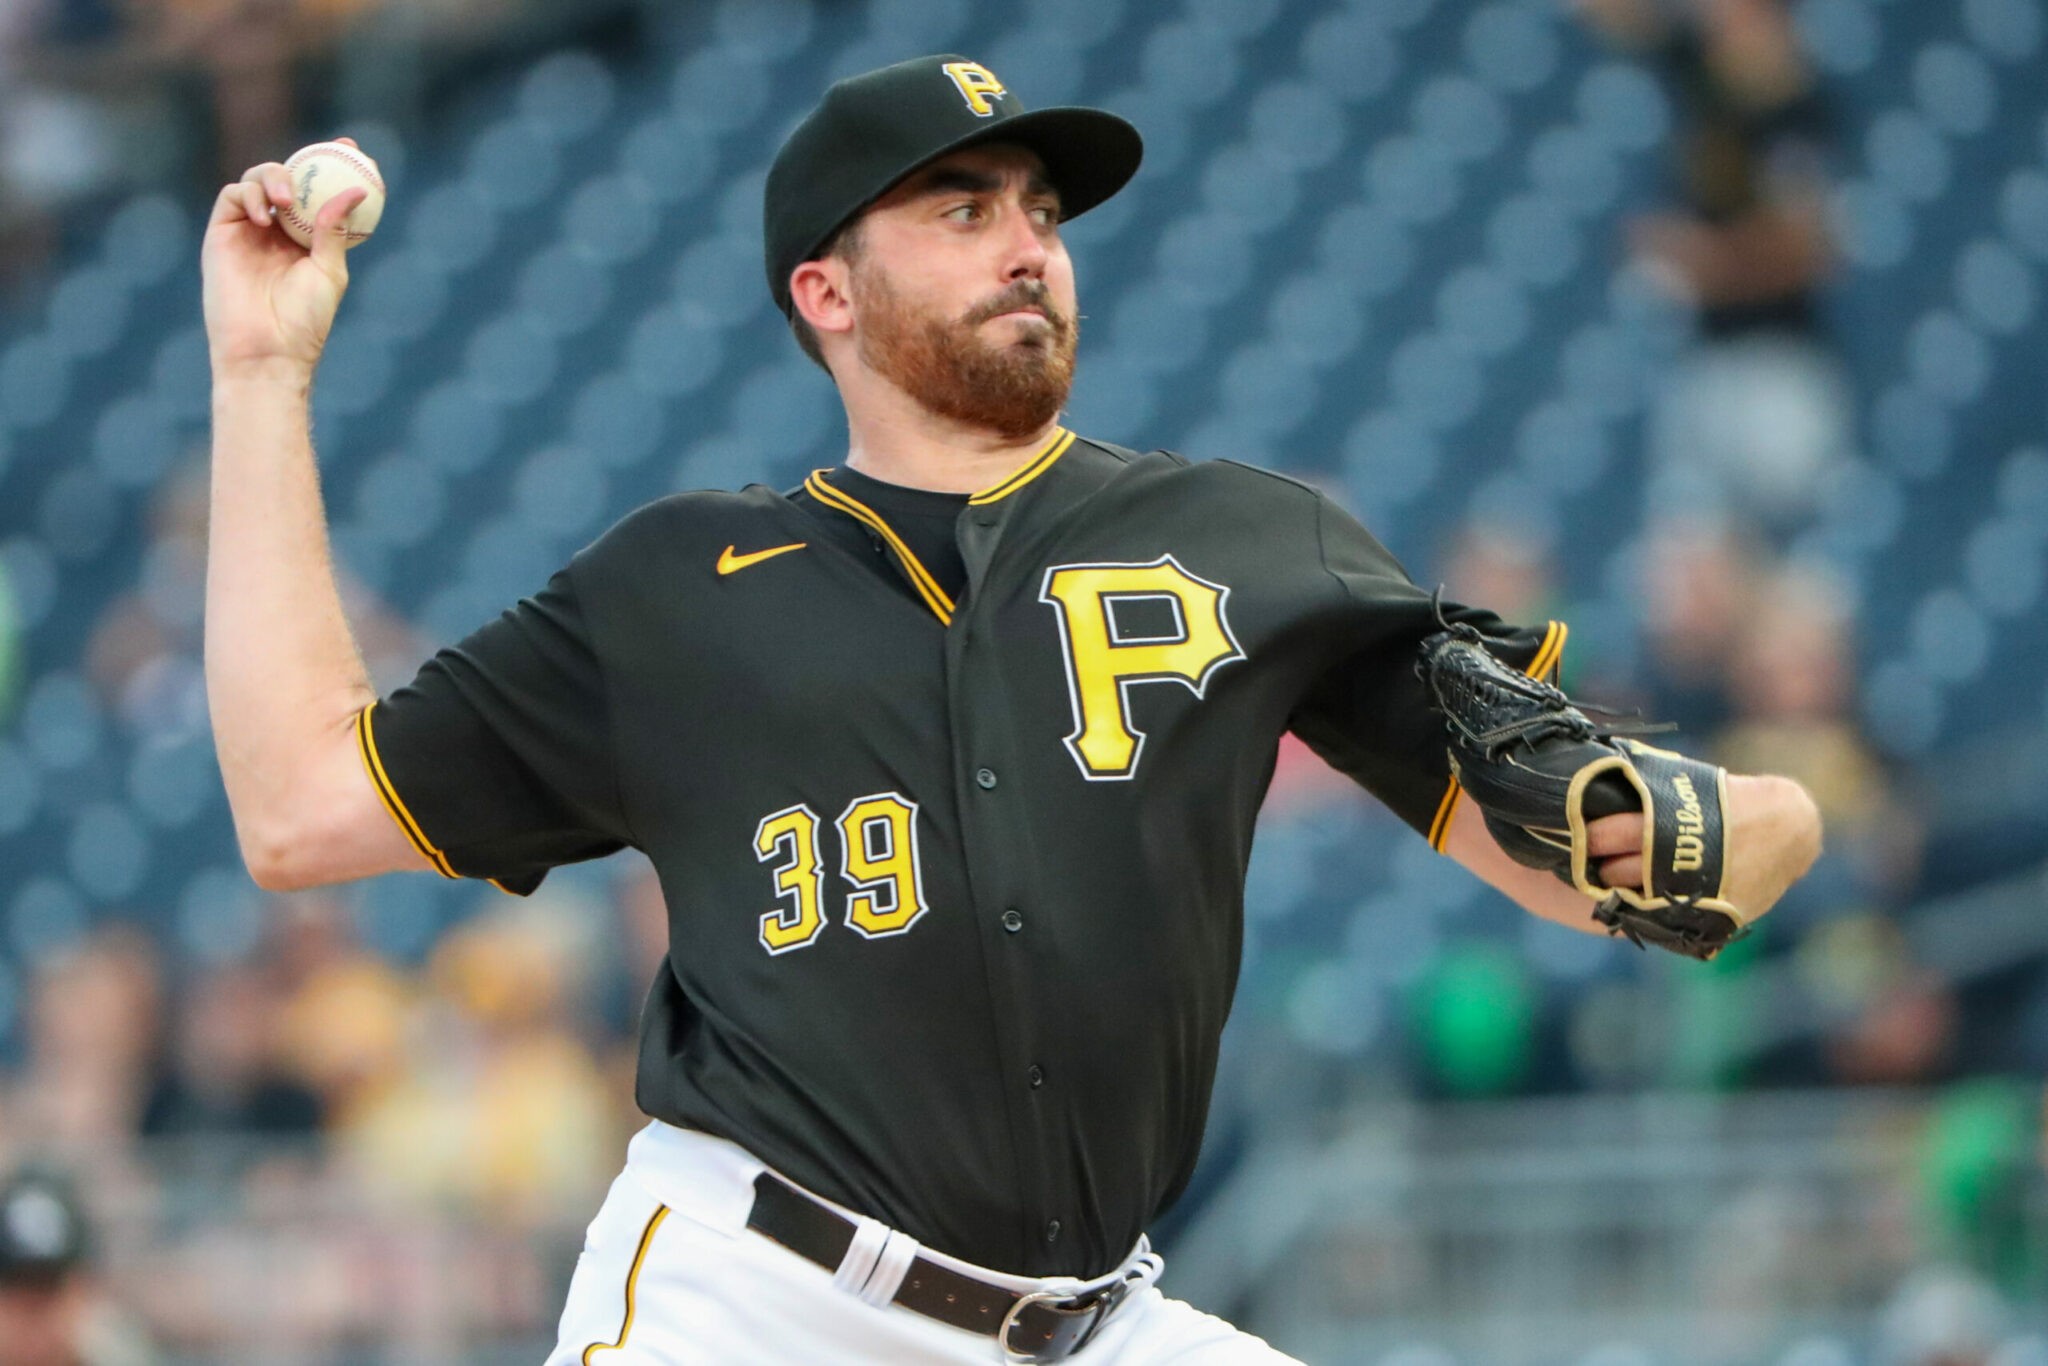 The Pirates Trade Zach Thompson to the Toronto Blue Jays for Outfielder ...